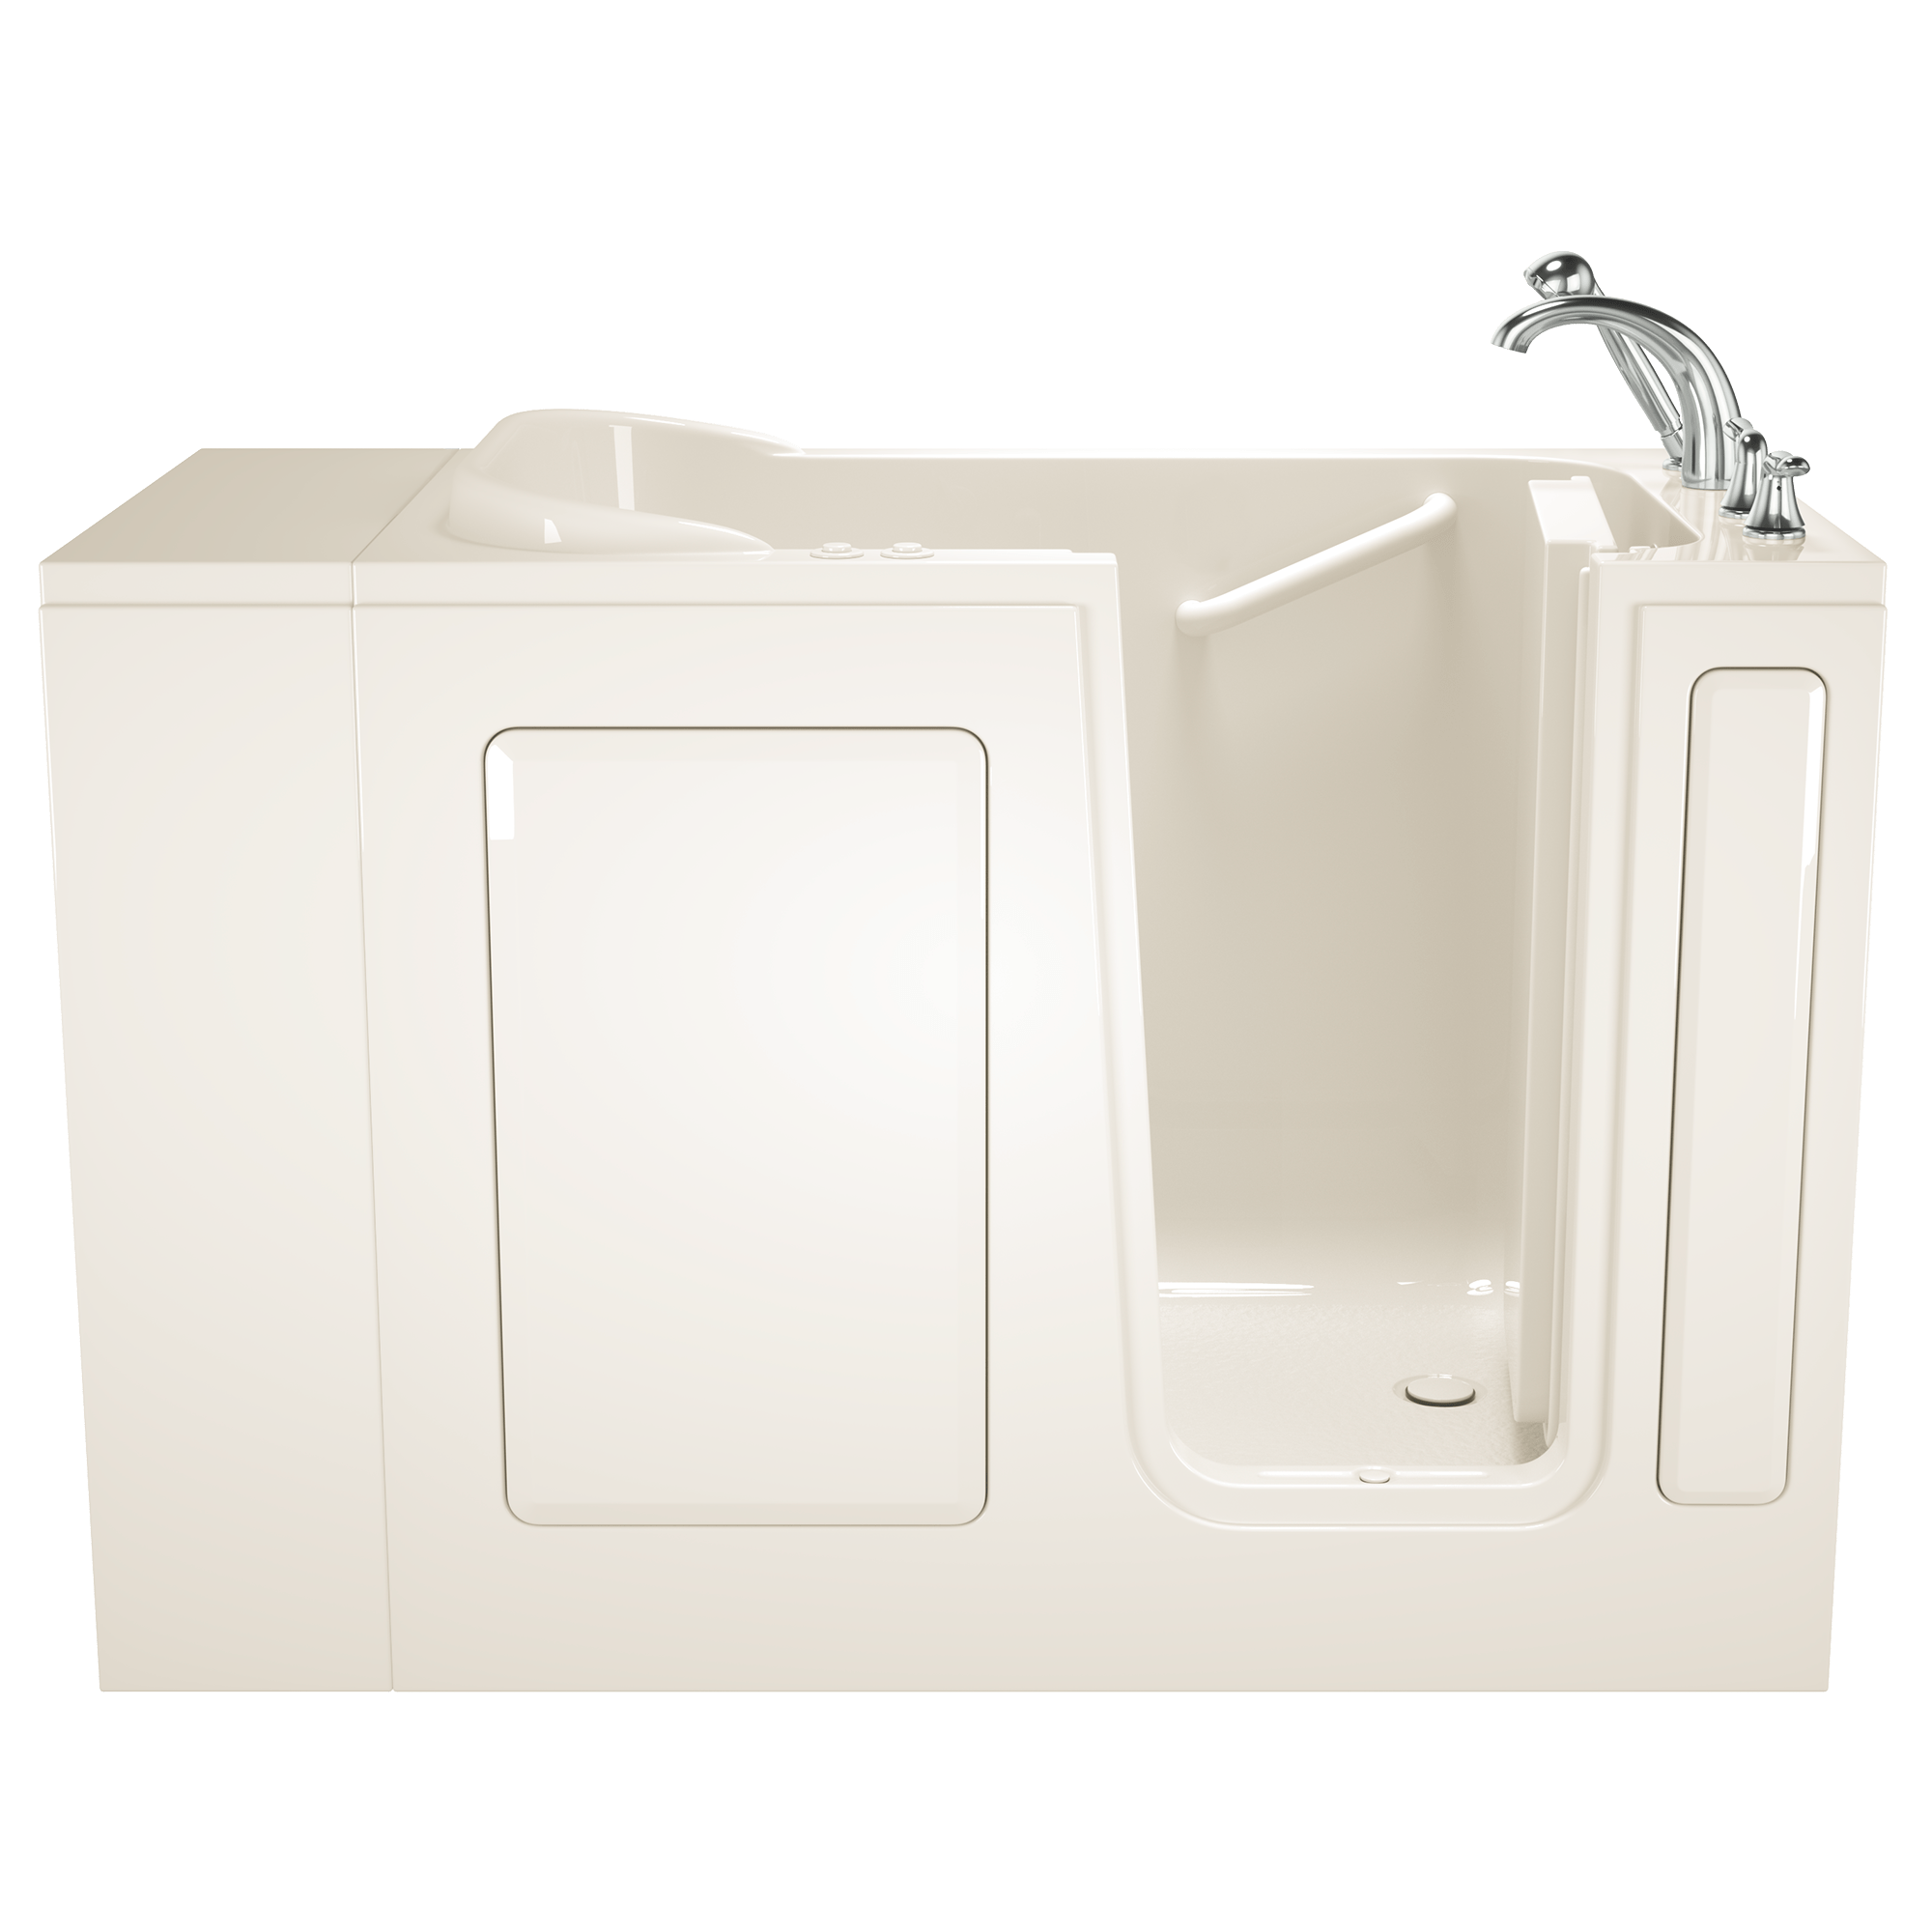 Gelcoat Entry Series 48 x 28 Inch Walk In Tub With Combination Air Spa and Whirlpool Systems - Right Hand Drain With Faucet ST BISCUIT